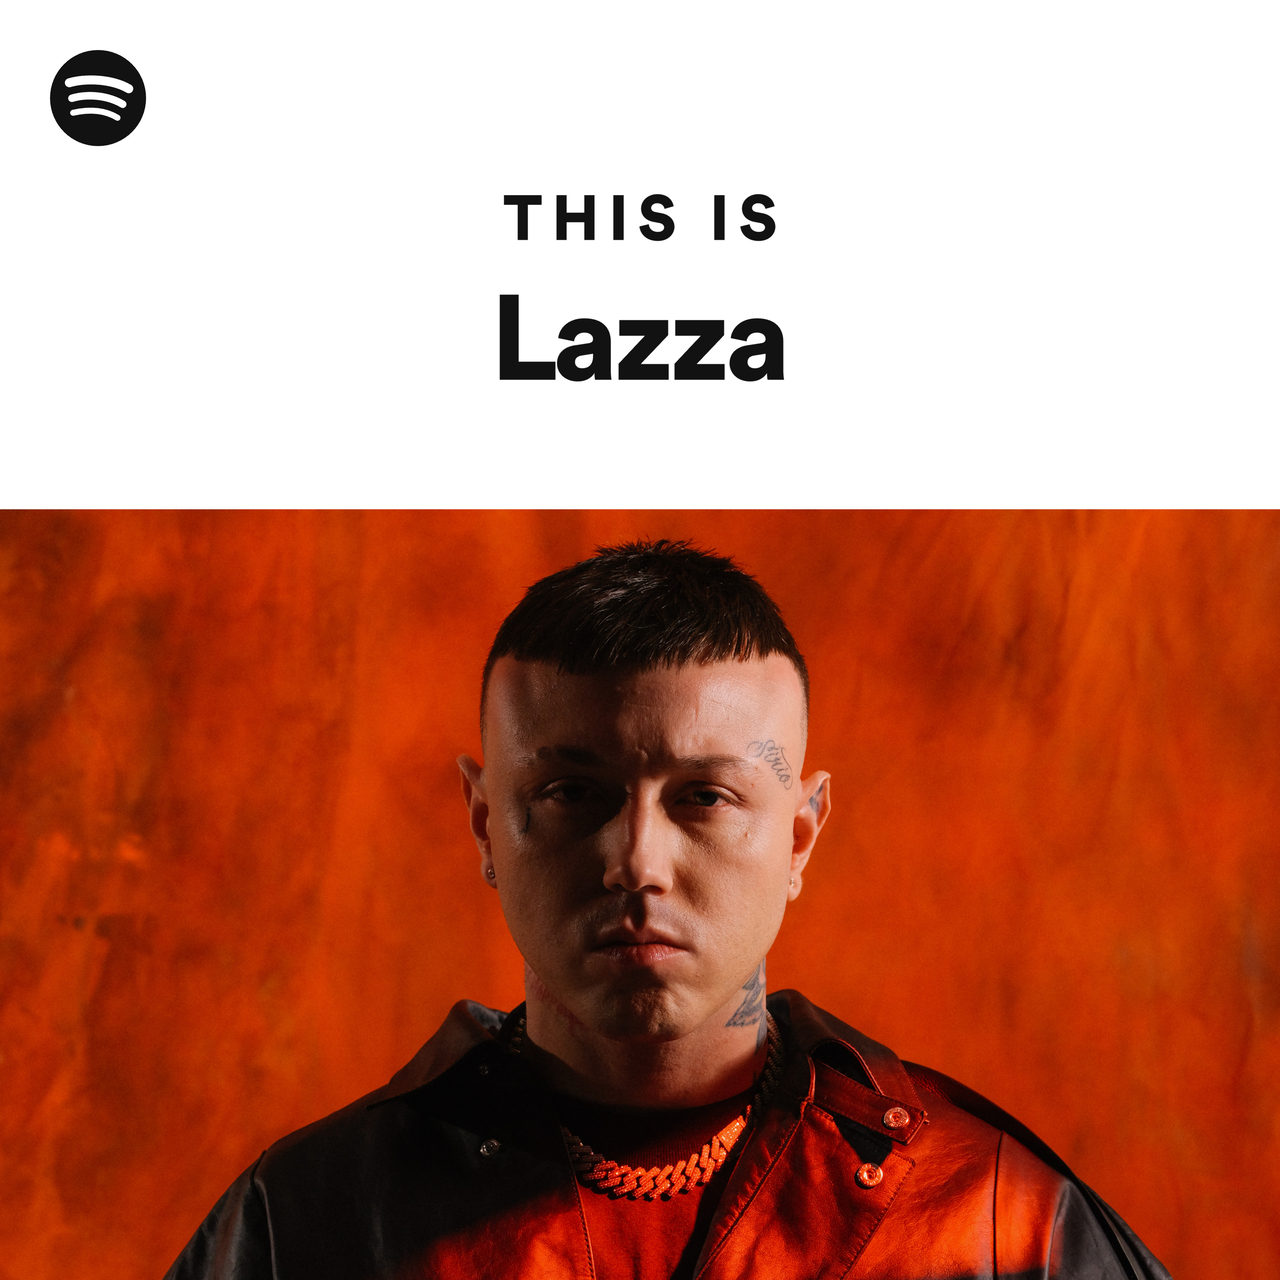 This Is Lazza - playlist by Spotify